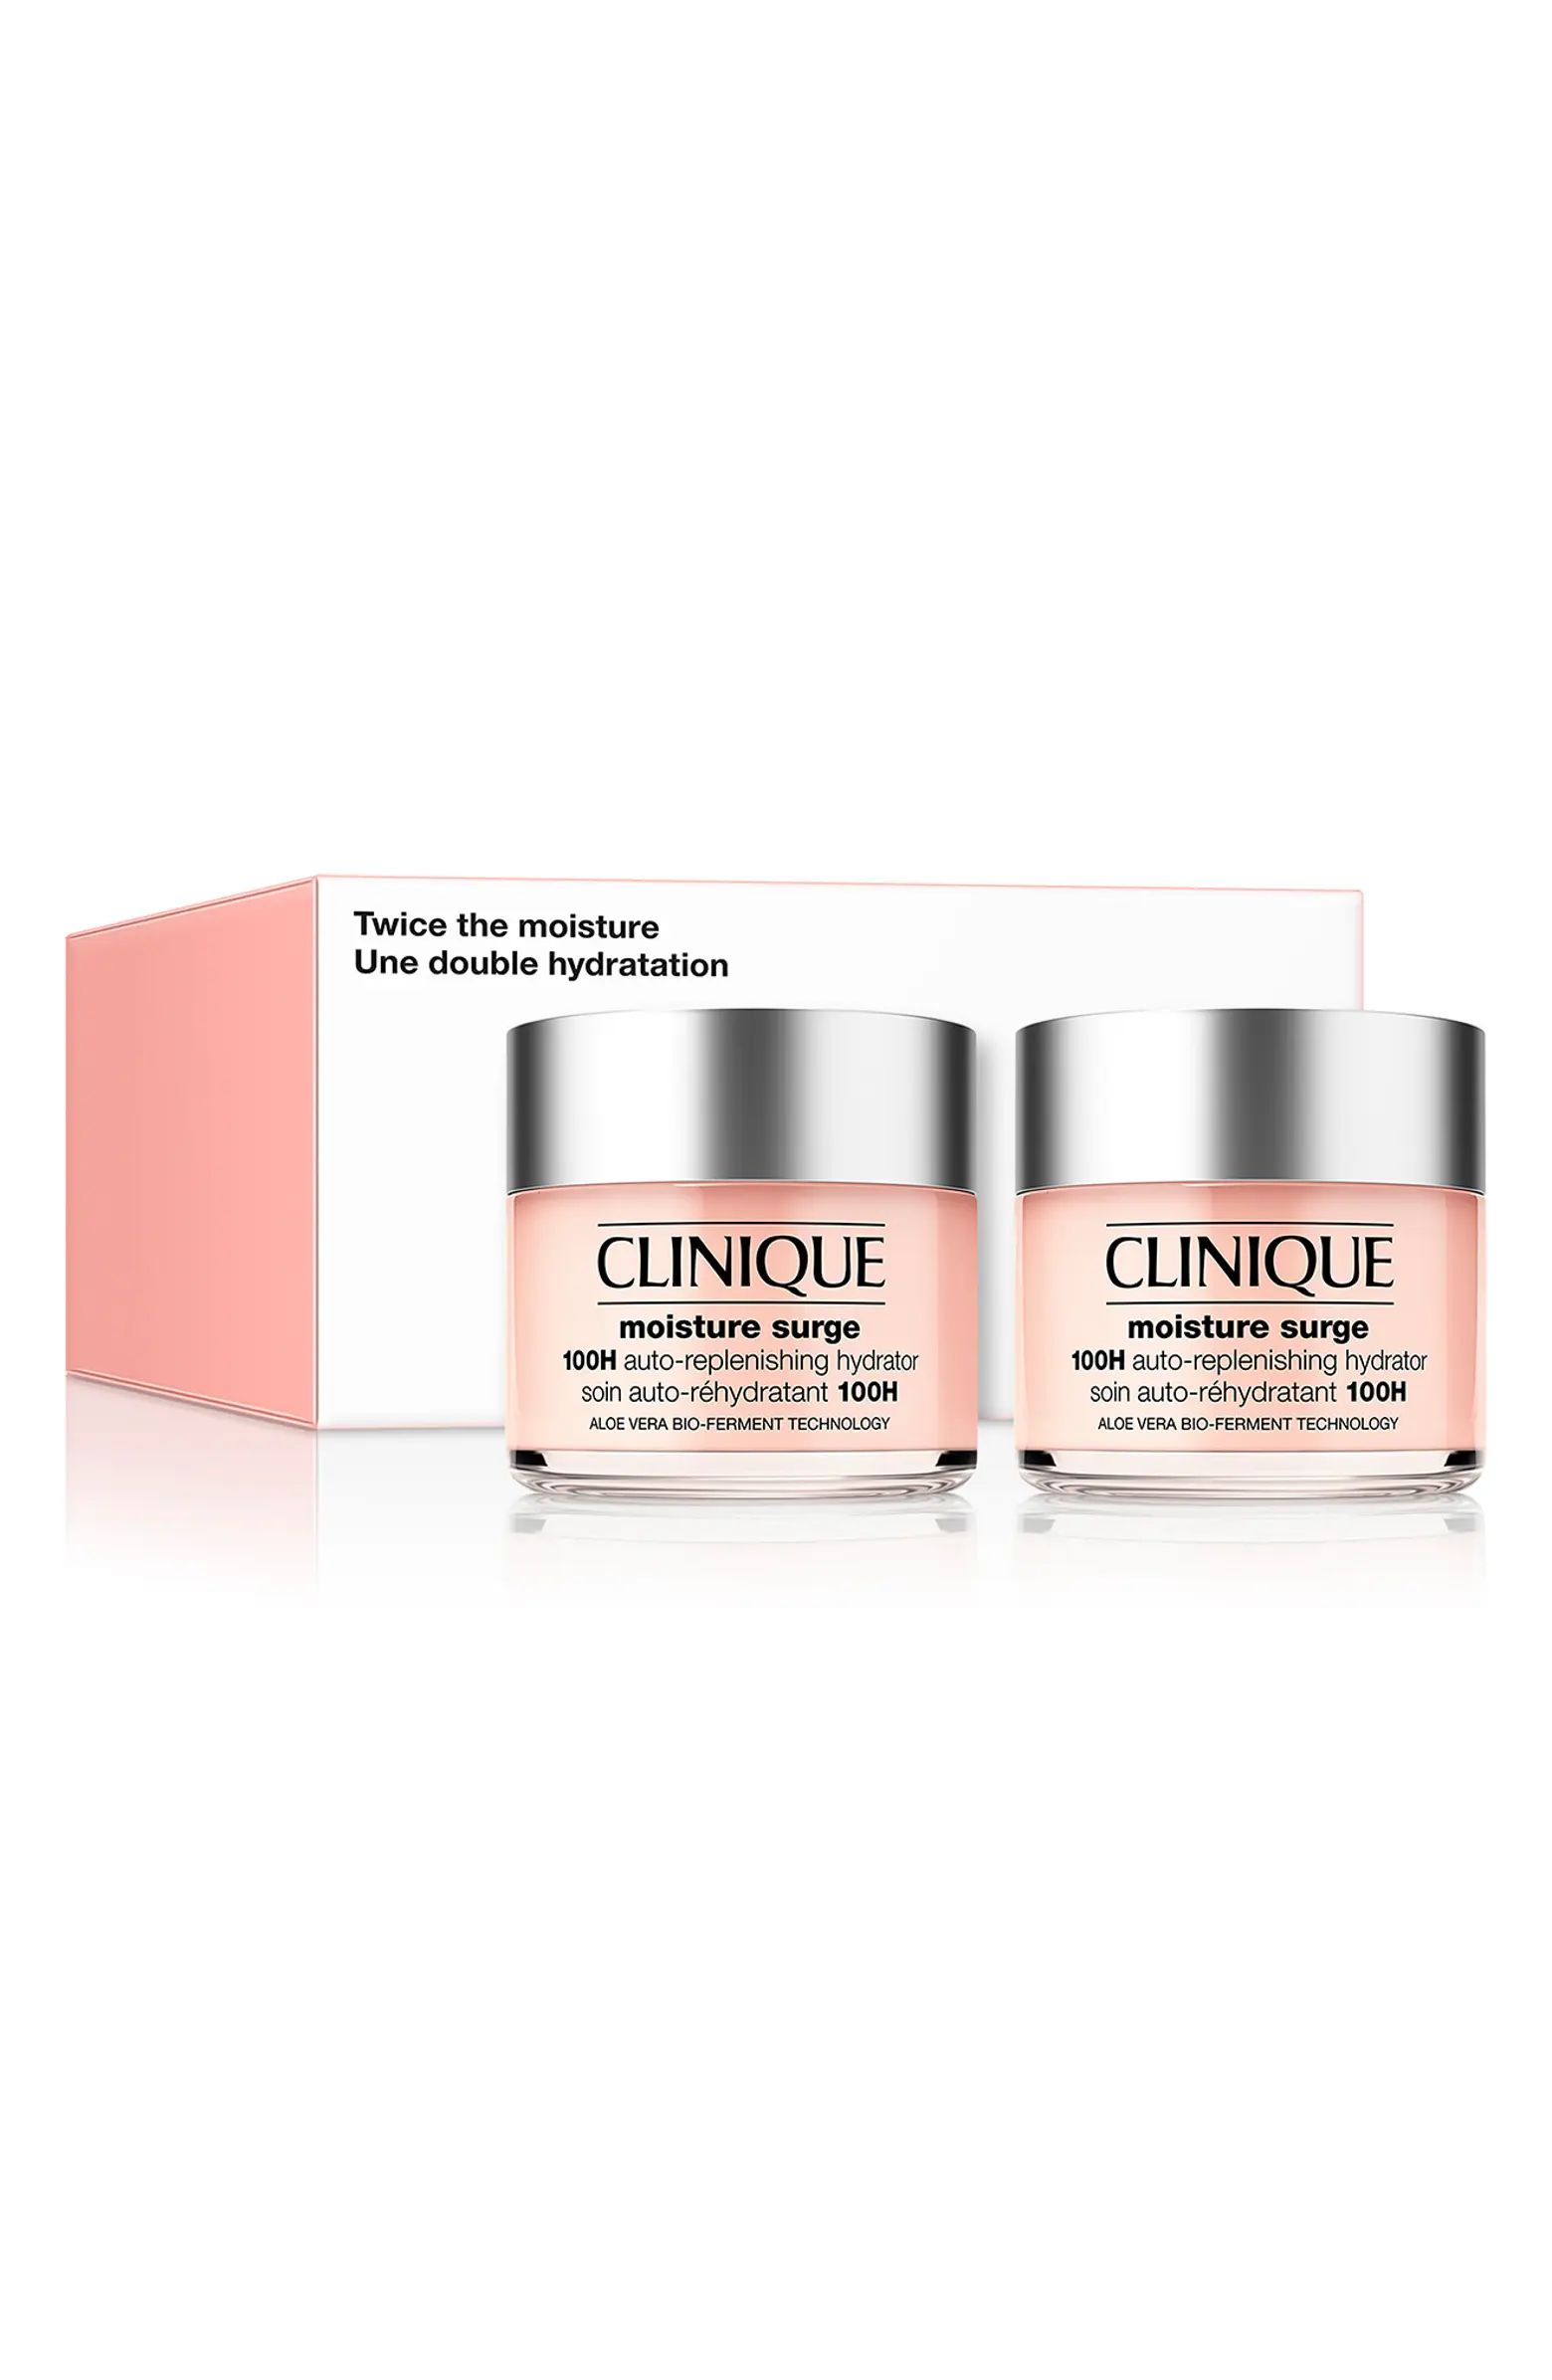 Clinique Twice the Moisture Duo Set $162 Value | Nordstrom | Nordstrom